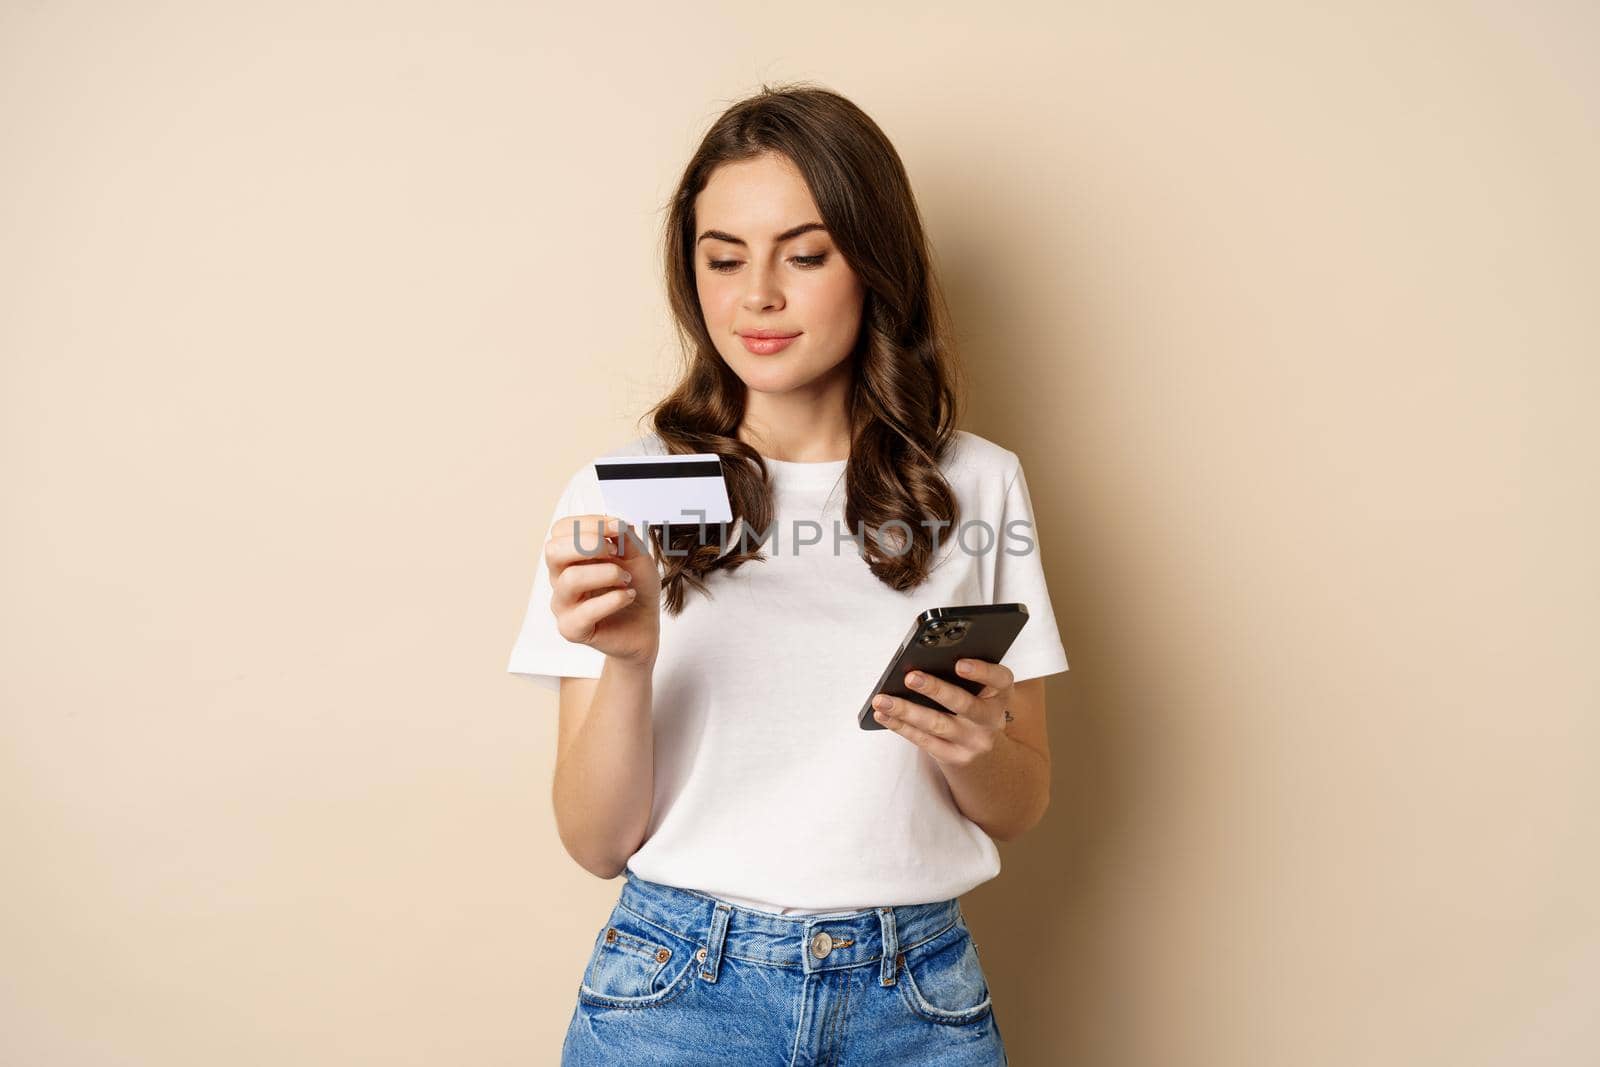 Image of young happy woman paying online, holding smartphone and credit card, enter info in application on mobile phone, standing against beige background.